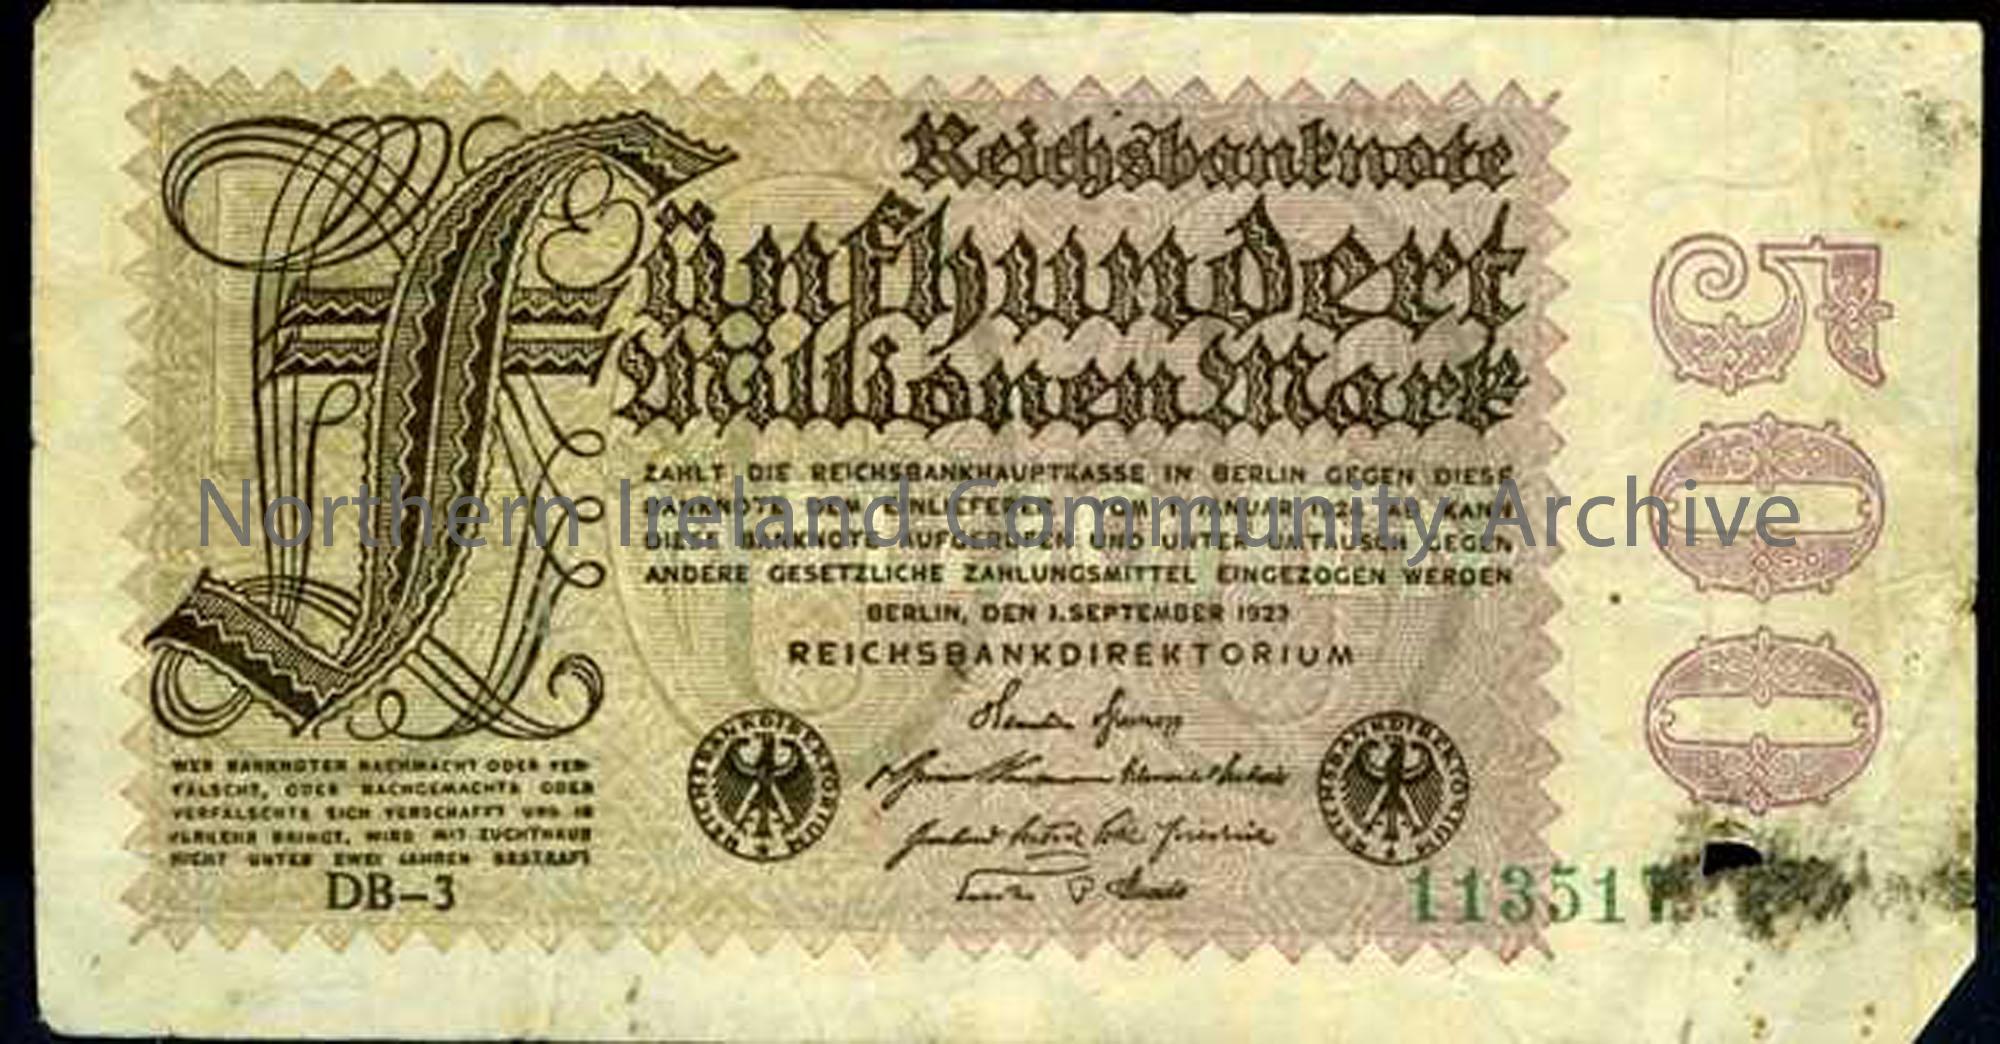 German banknote for 500 marks